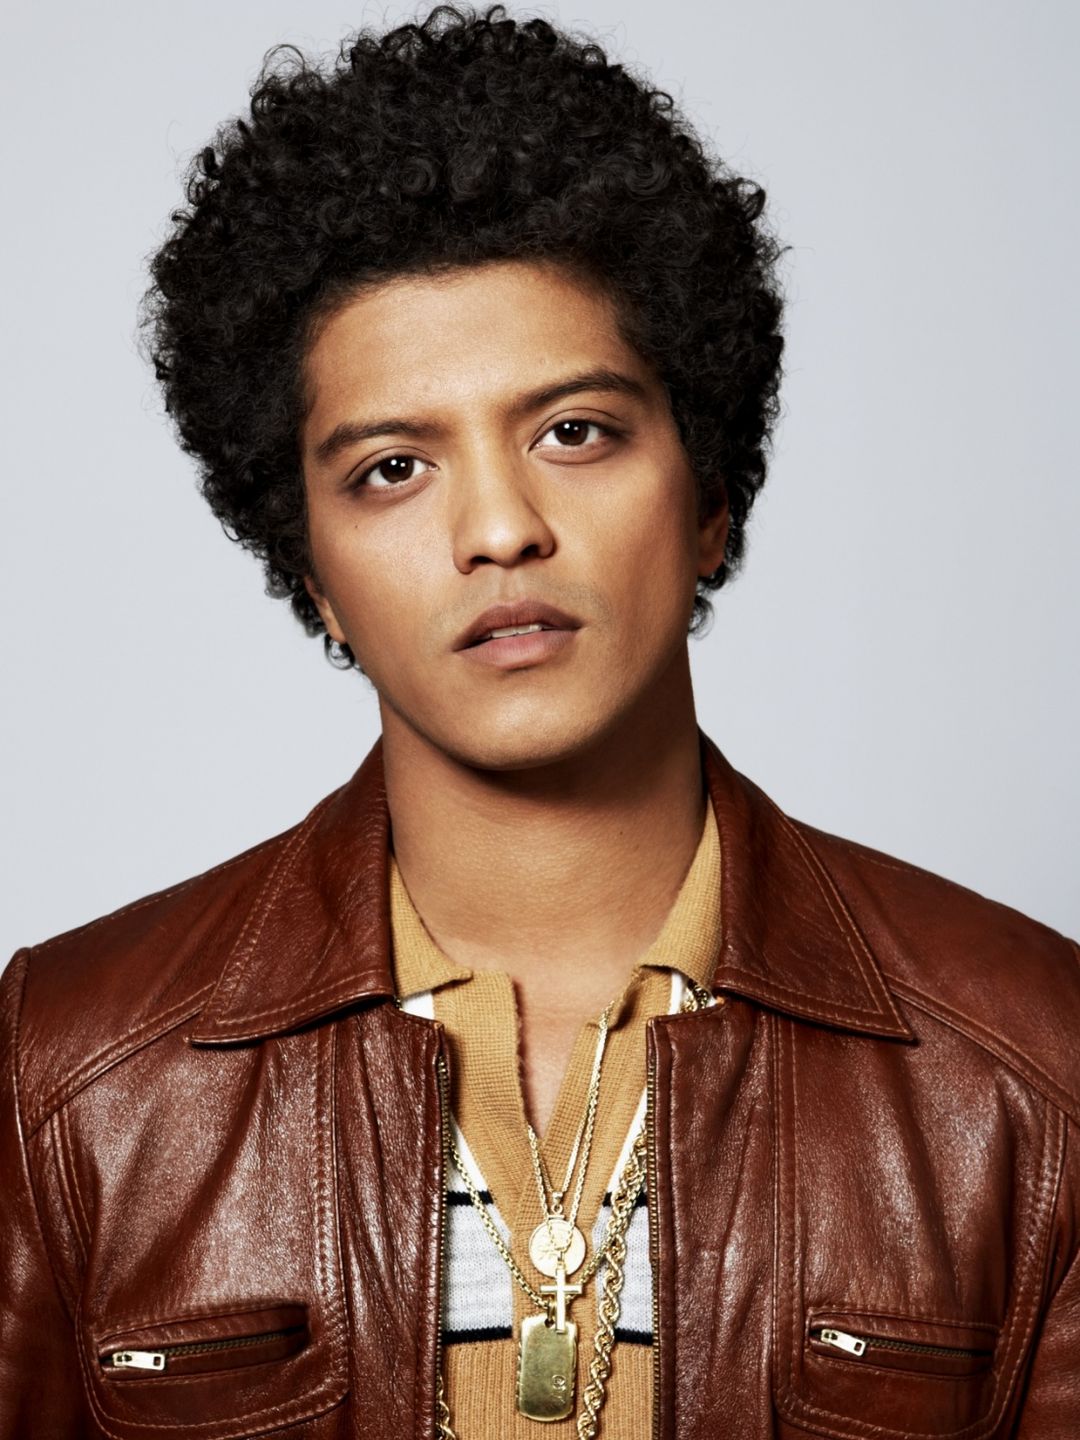 Bruno Mars how did he became famous